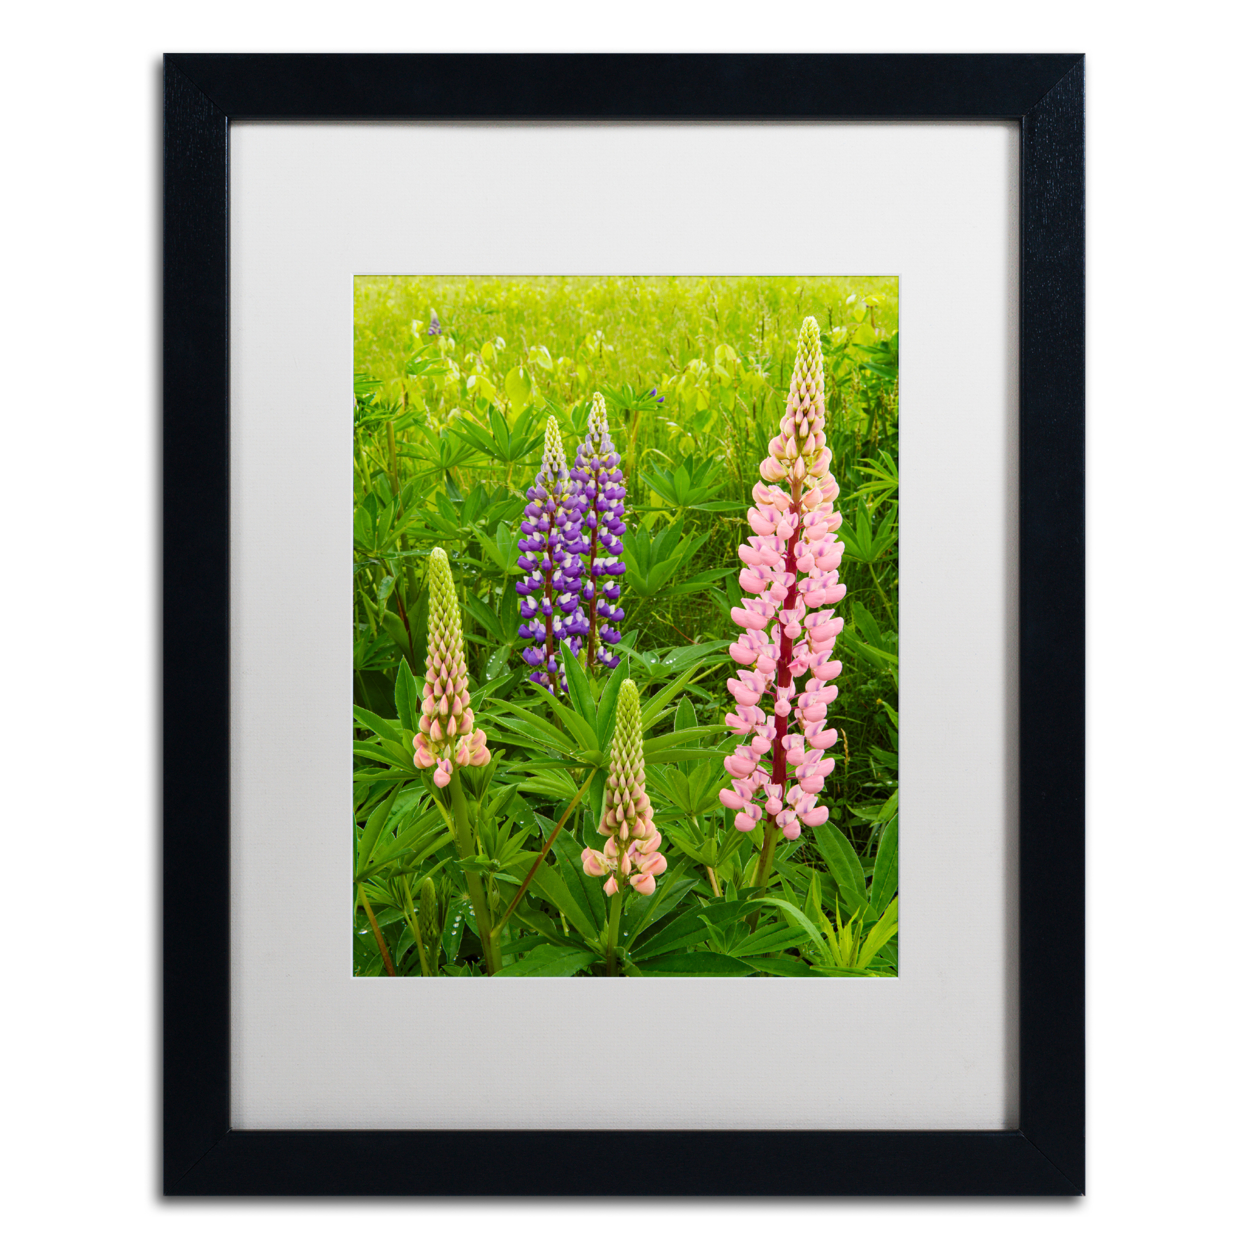 Michael Blanchette Photography 'Lupine Family' Black Wooden Framed Art 18 X 22 Inches